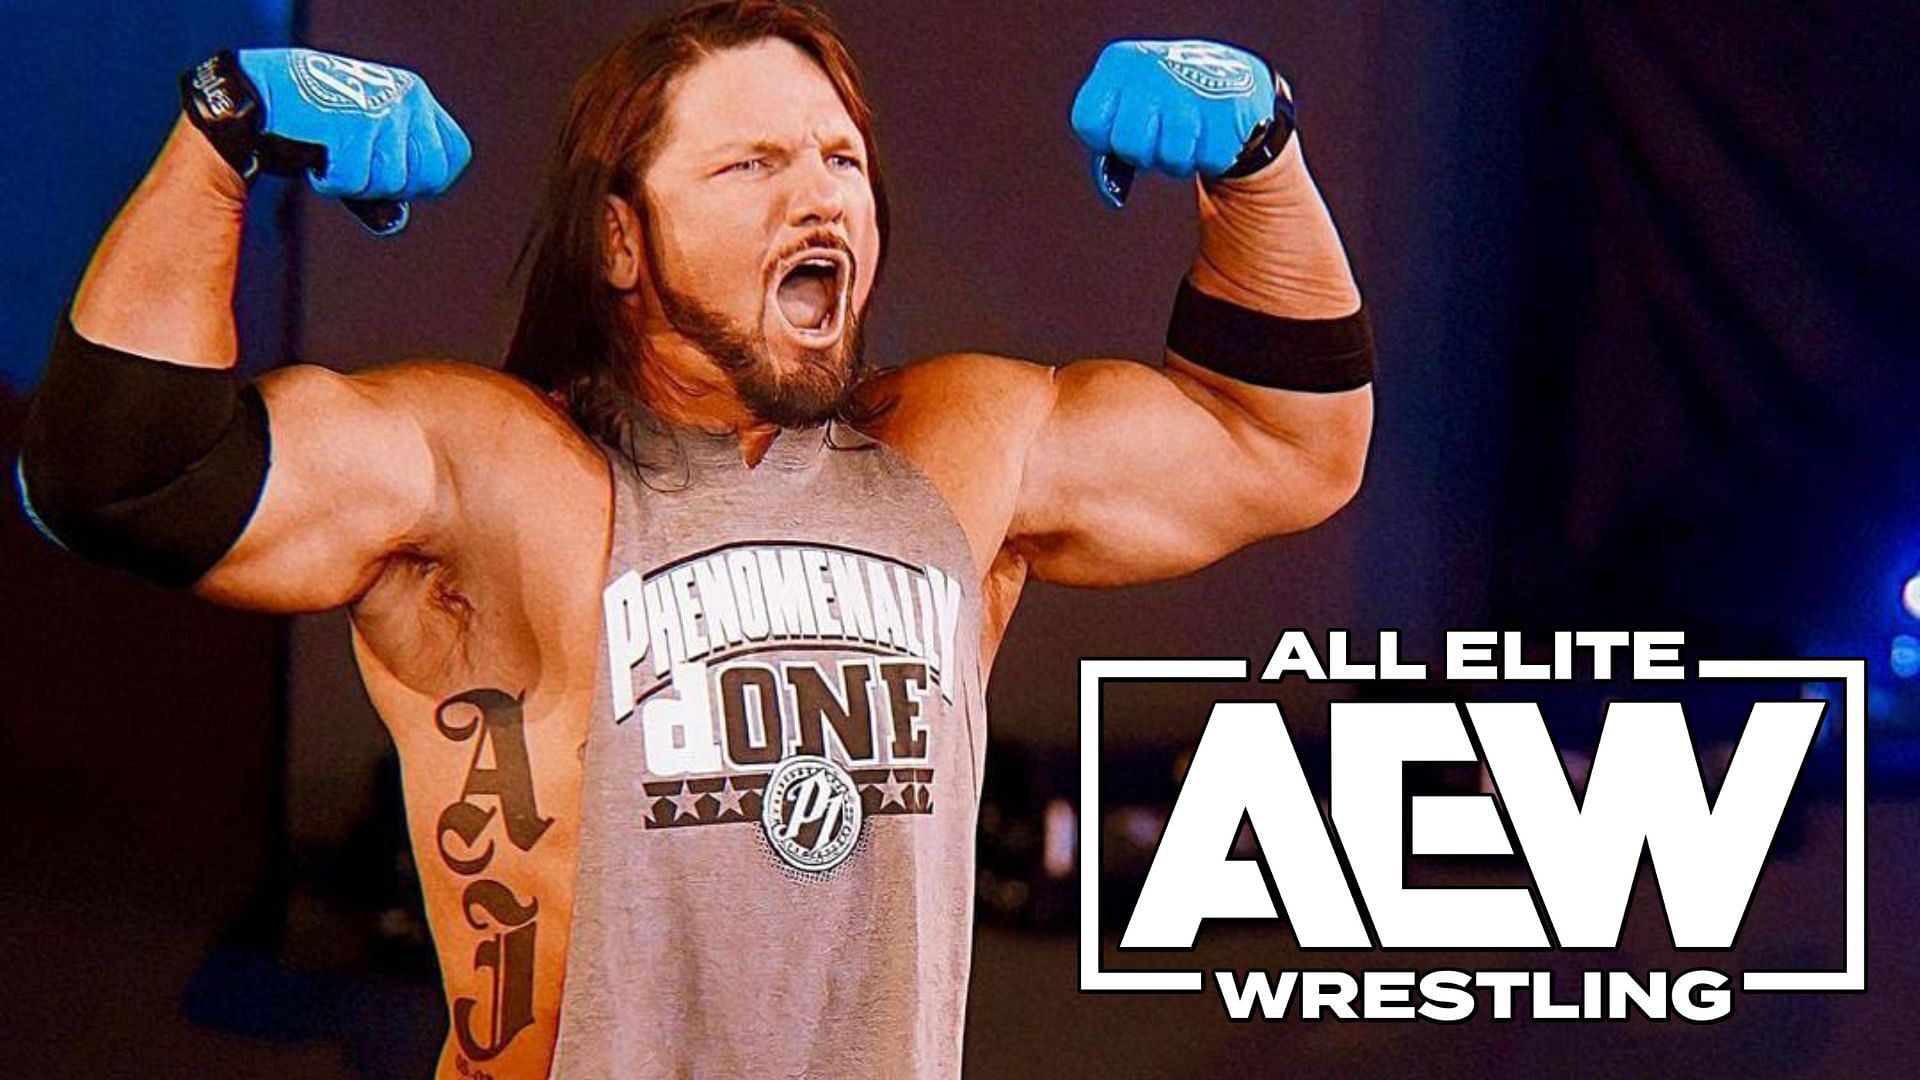 Could AJ Styles lure this AEW star back to WWE?